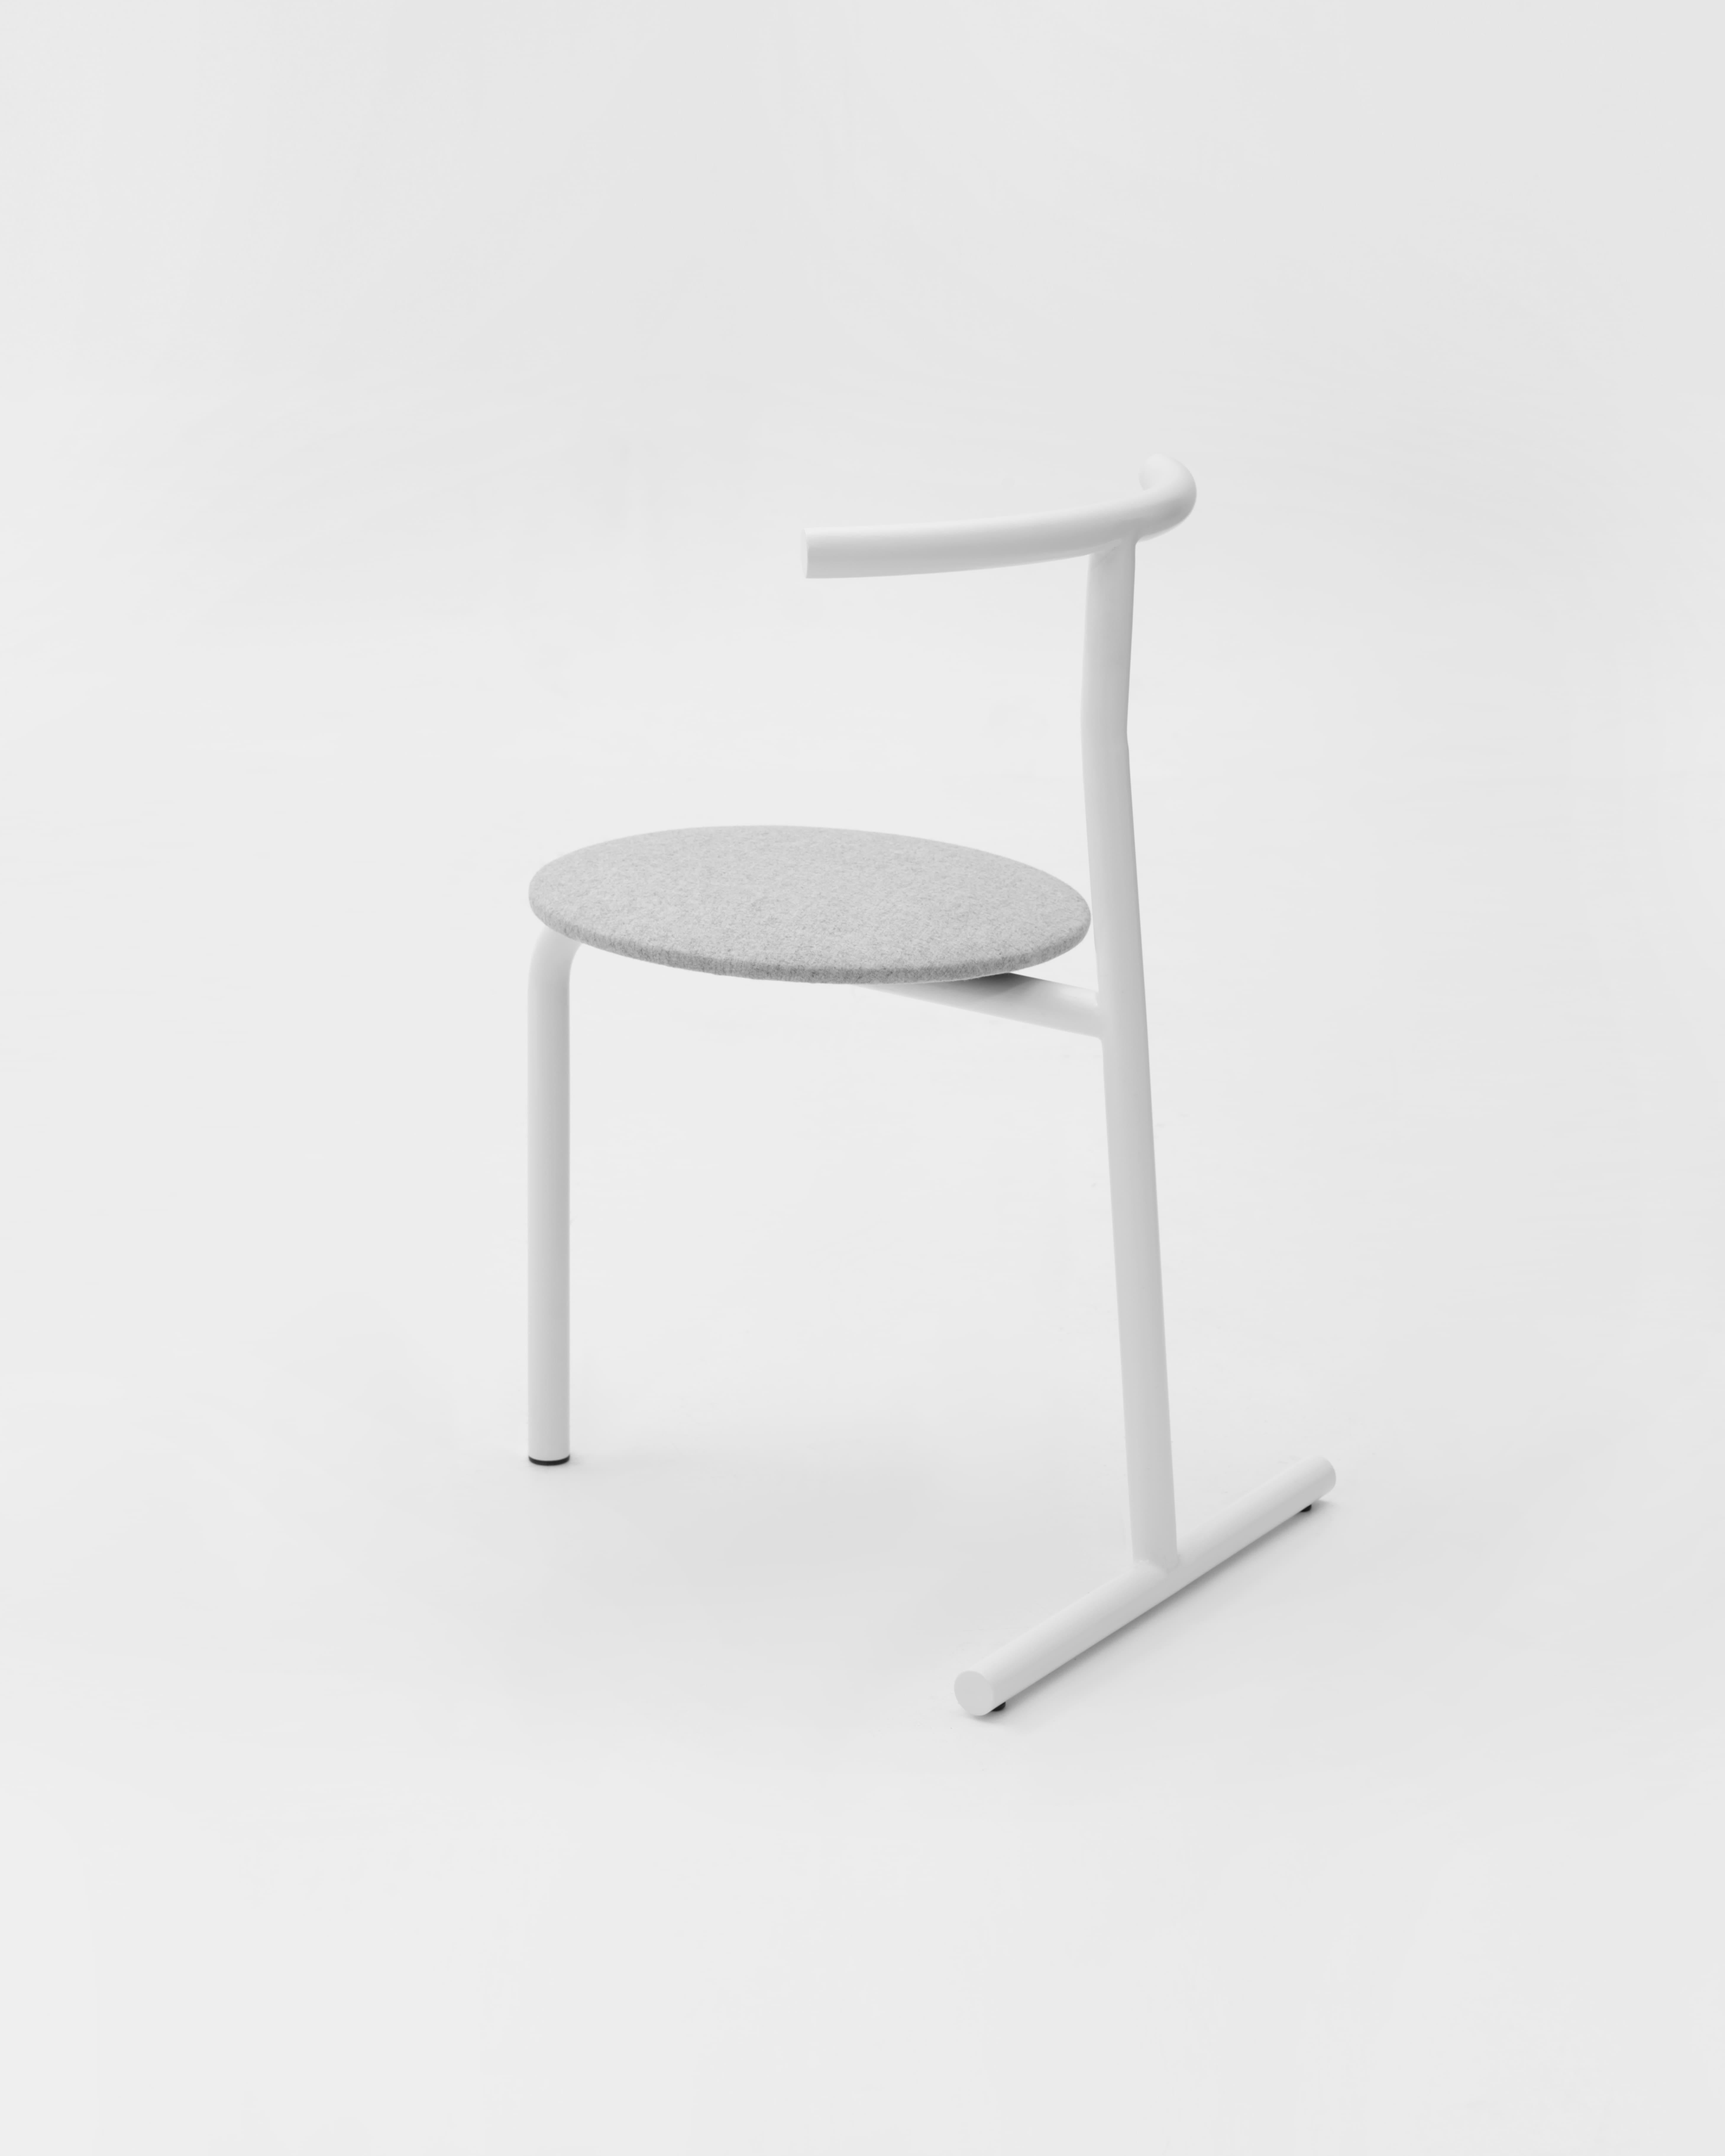 Eater upholstered steel seat chair by Oito
Designed by Ivan Voitovych.
Dimensions: W 58cm x H 78cm x D 50cm. Seat Height 45cm.
Materials: Powder-coated steel. Fabric seat. Suitable for outdoor use. Registered design.
Weight: 5.2 kg

We've